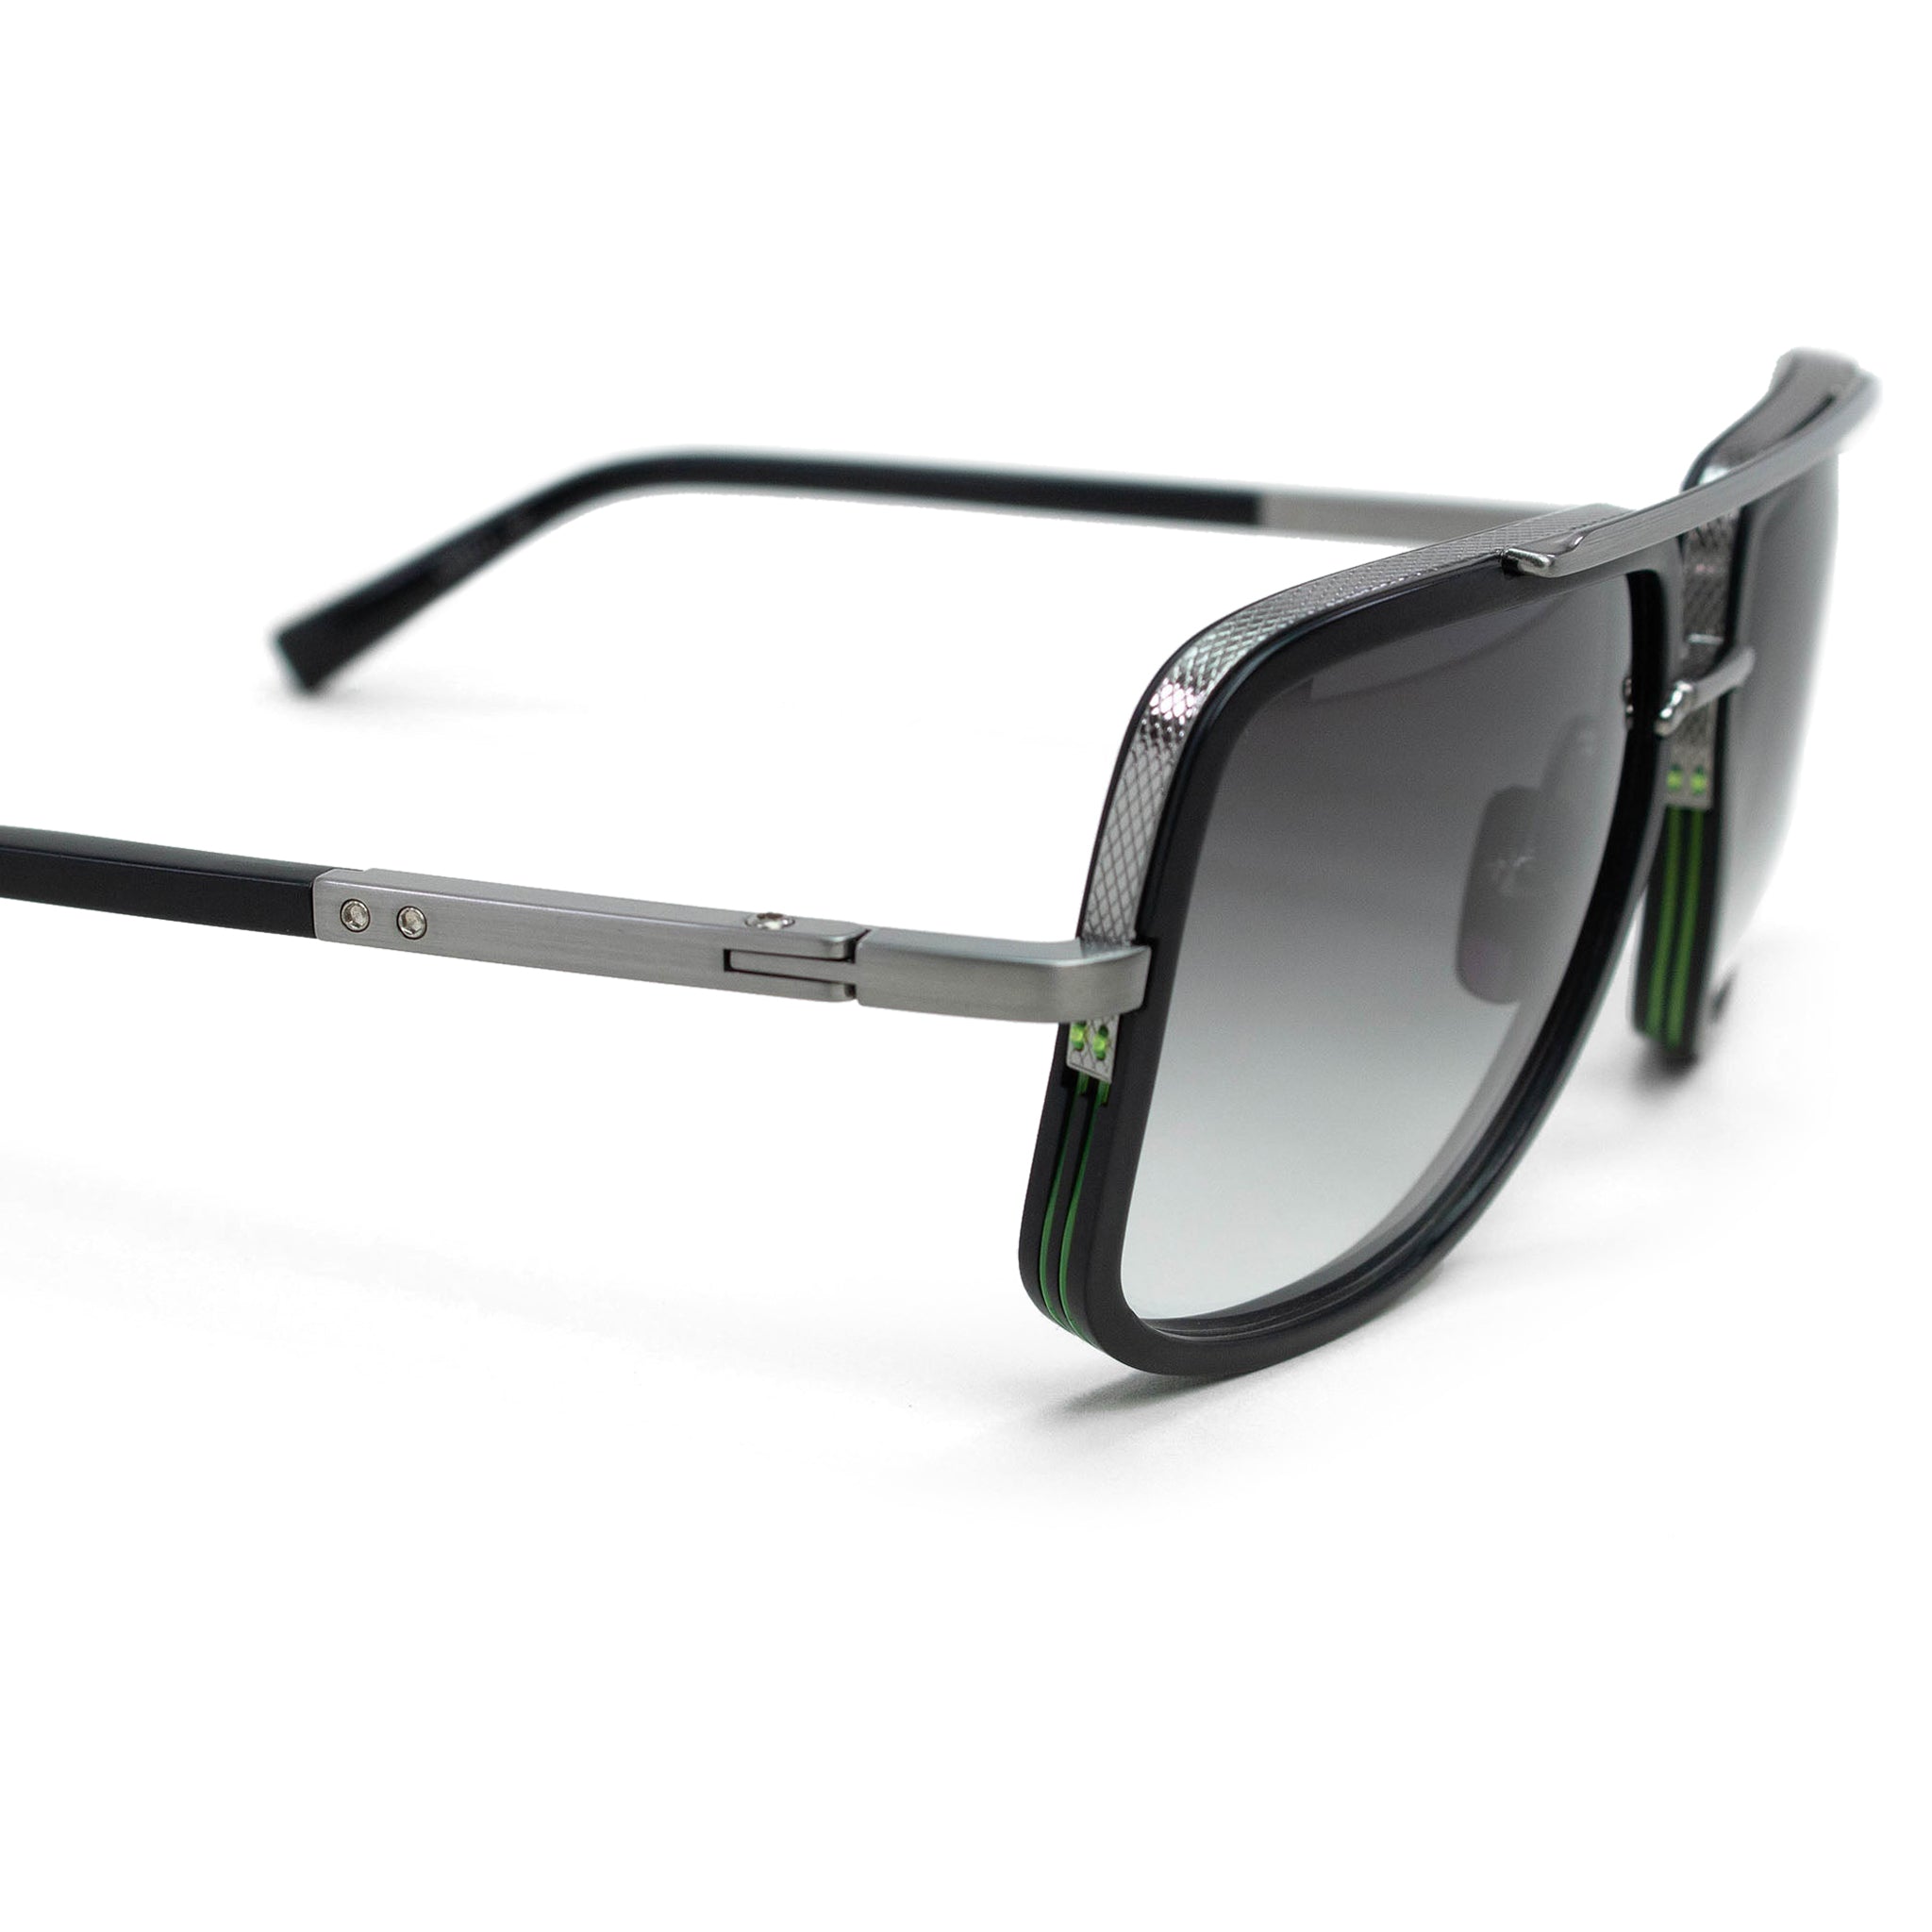 the sunglasses retail at $200 USD - 2030 Mach One Black Silver